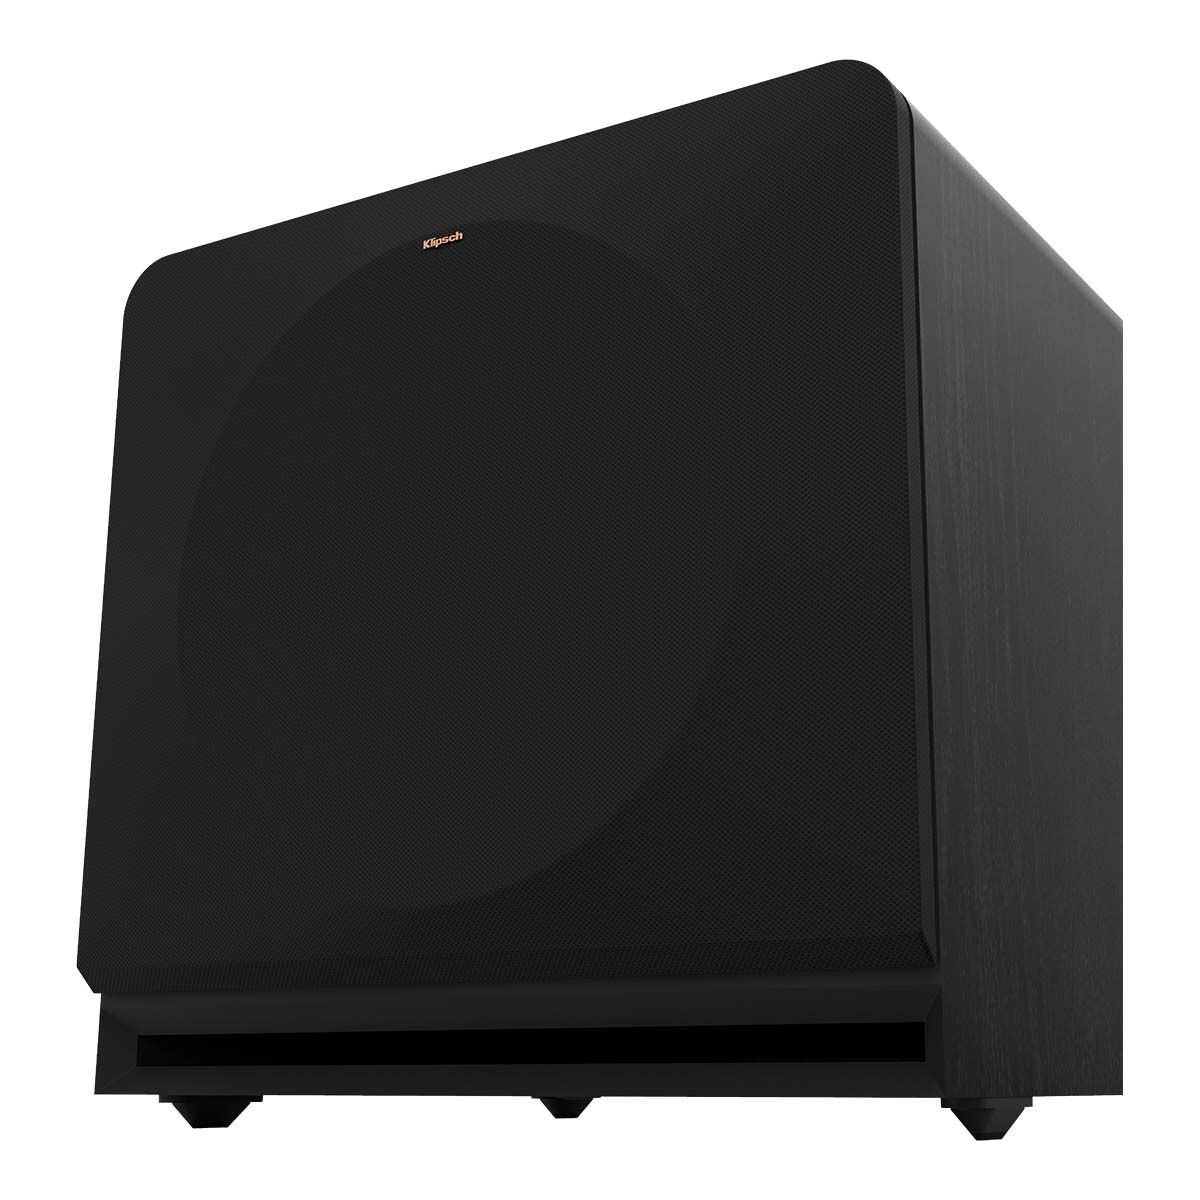 Klipsch RP-1600SW 16" Powered Subwoofer - Ebony - angled front right view with grille